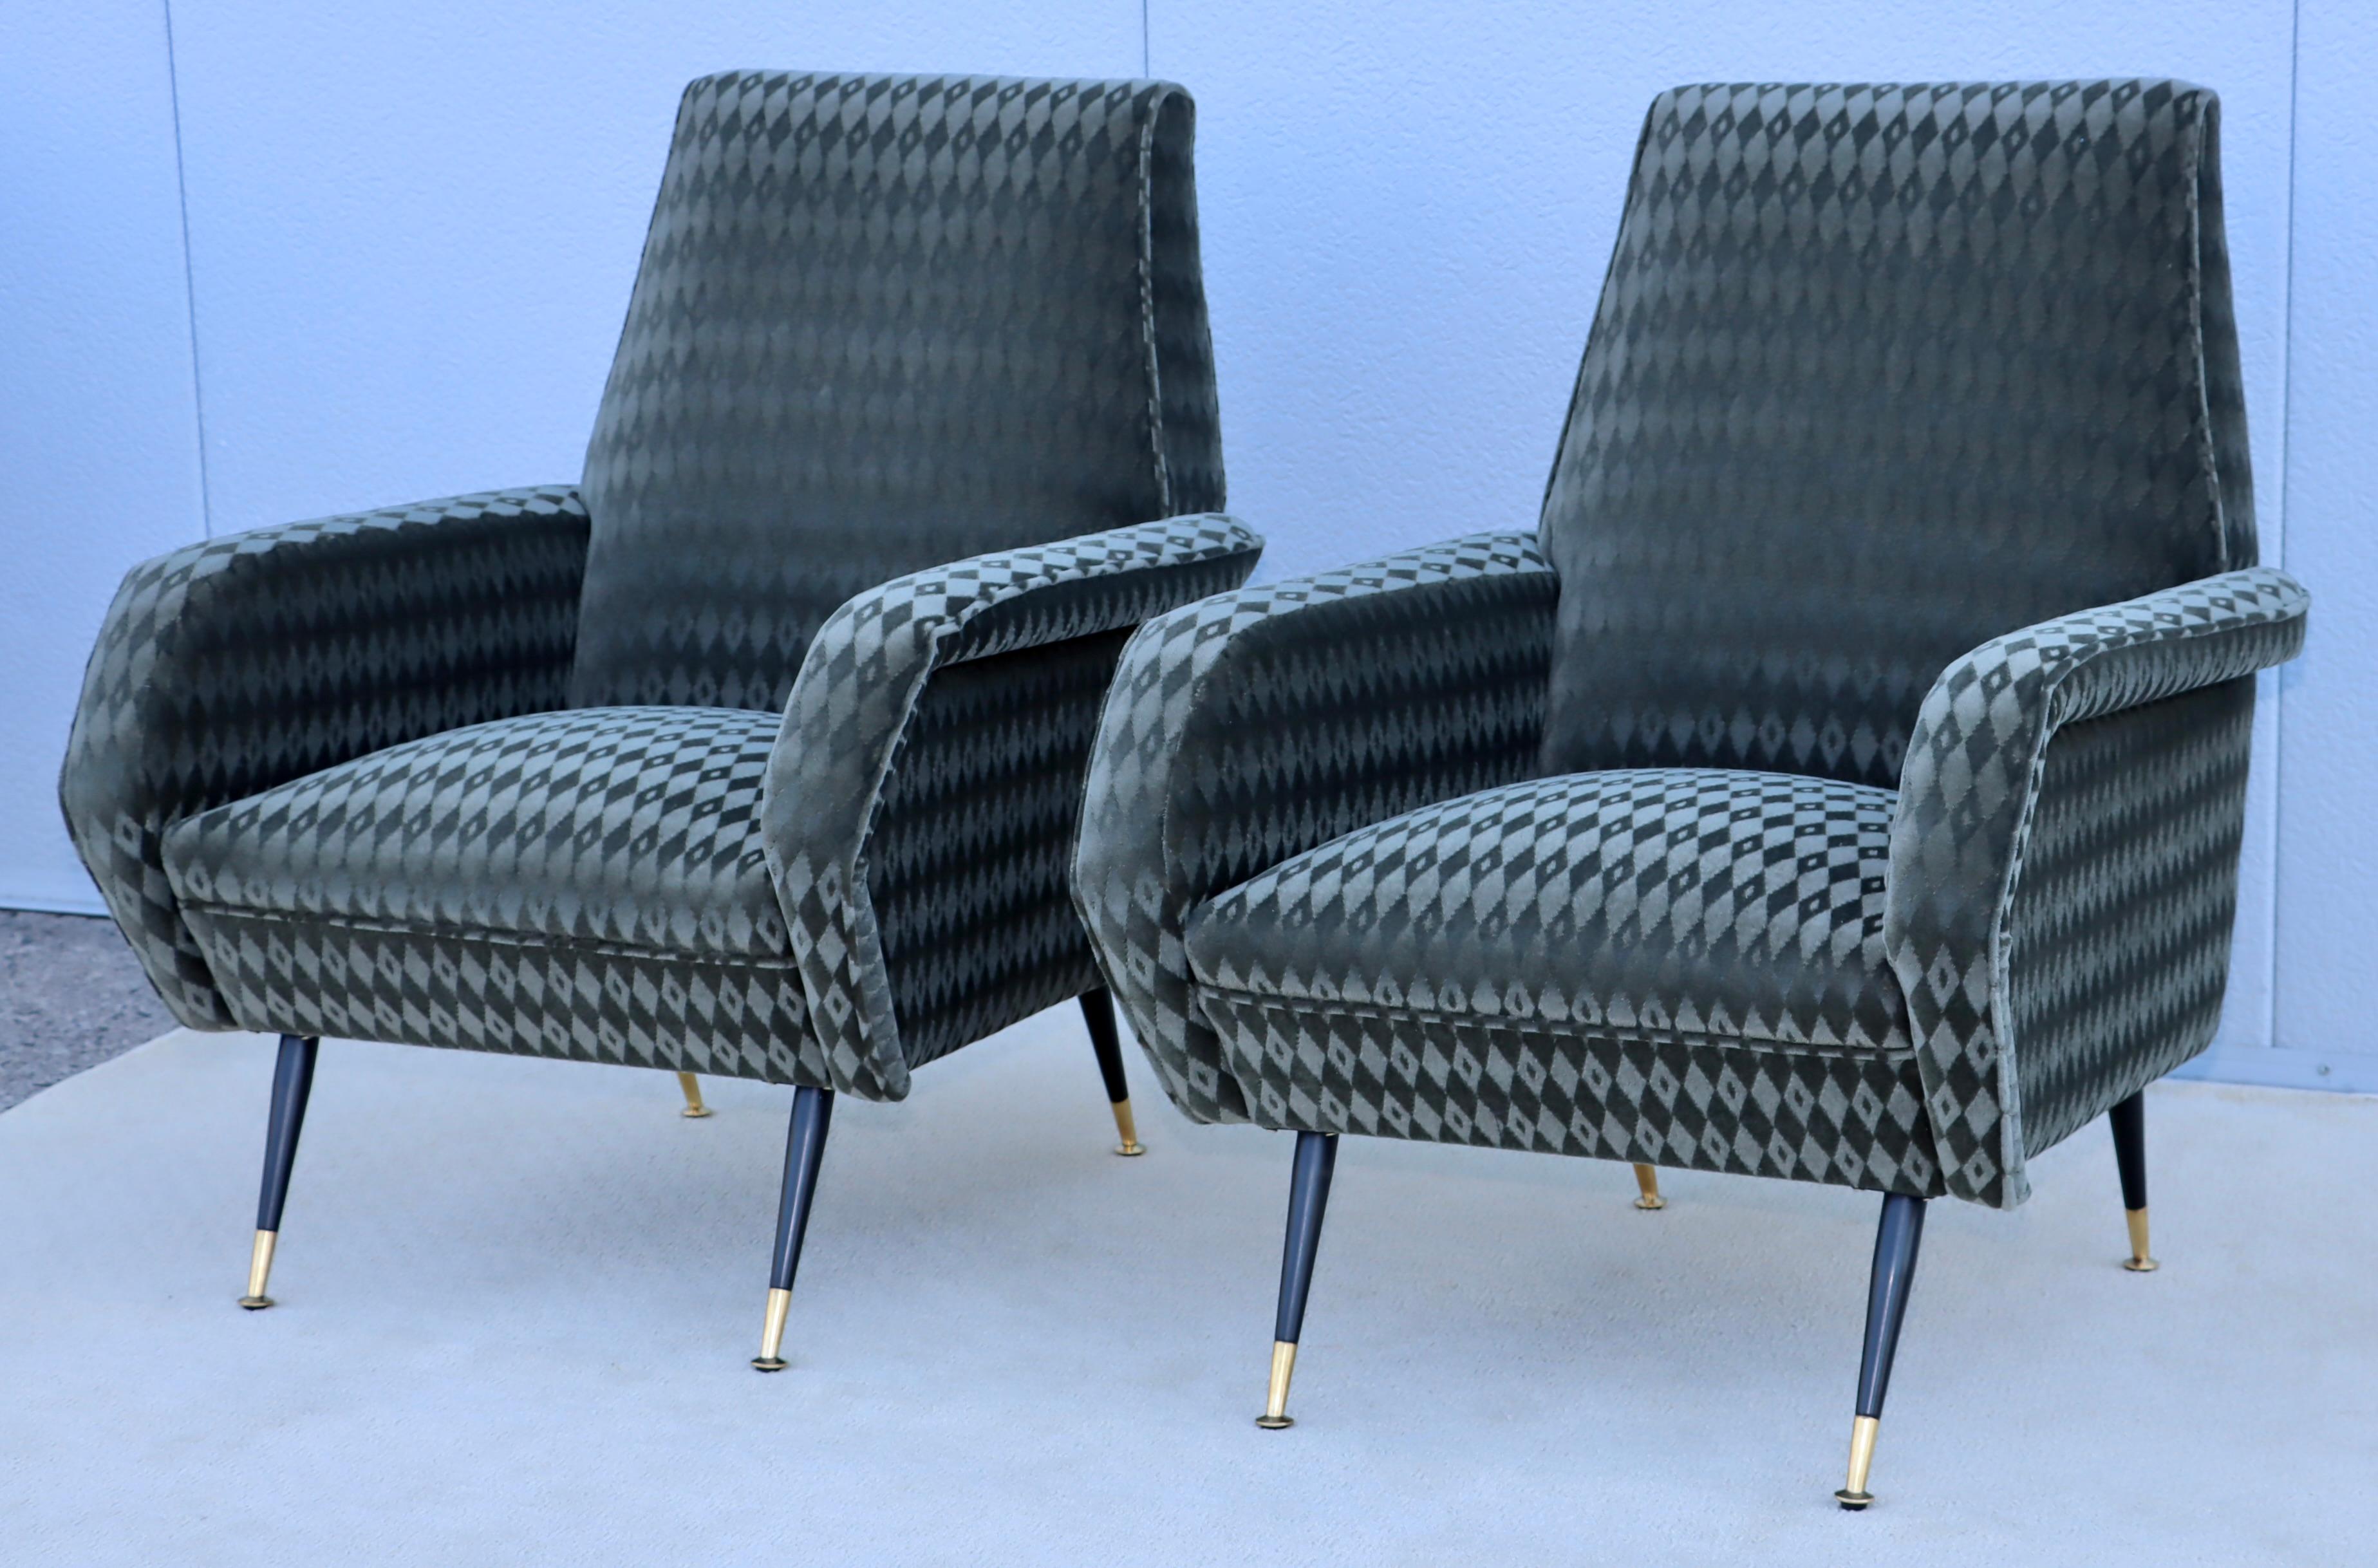 1950's Mid-Century Modern Italian Lounge Chairs mit Donghia Mohair Polsterung (Messing) im Angebot